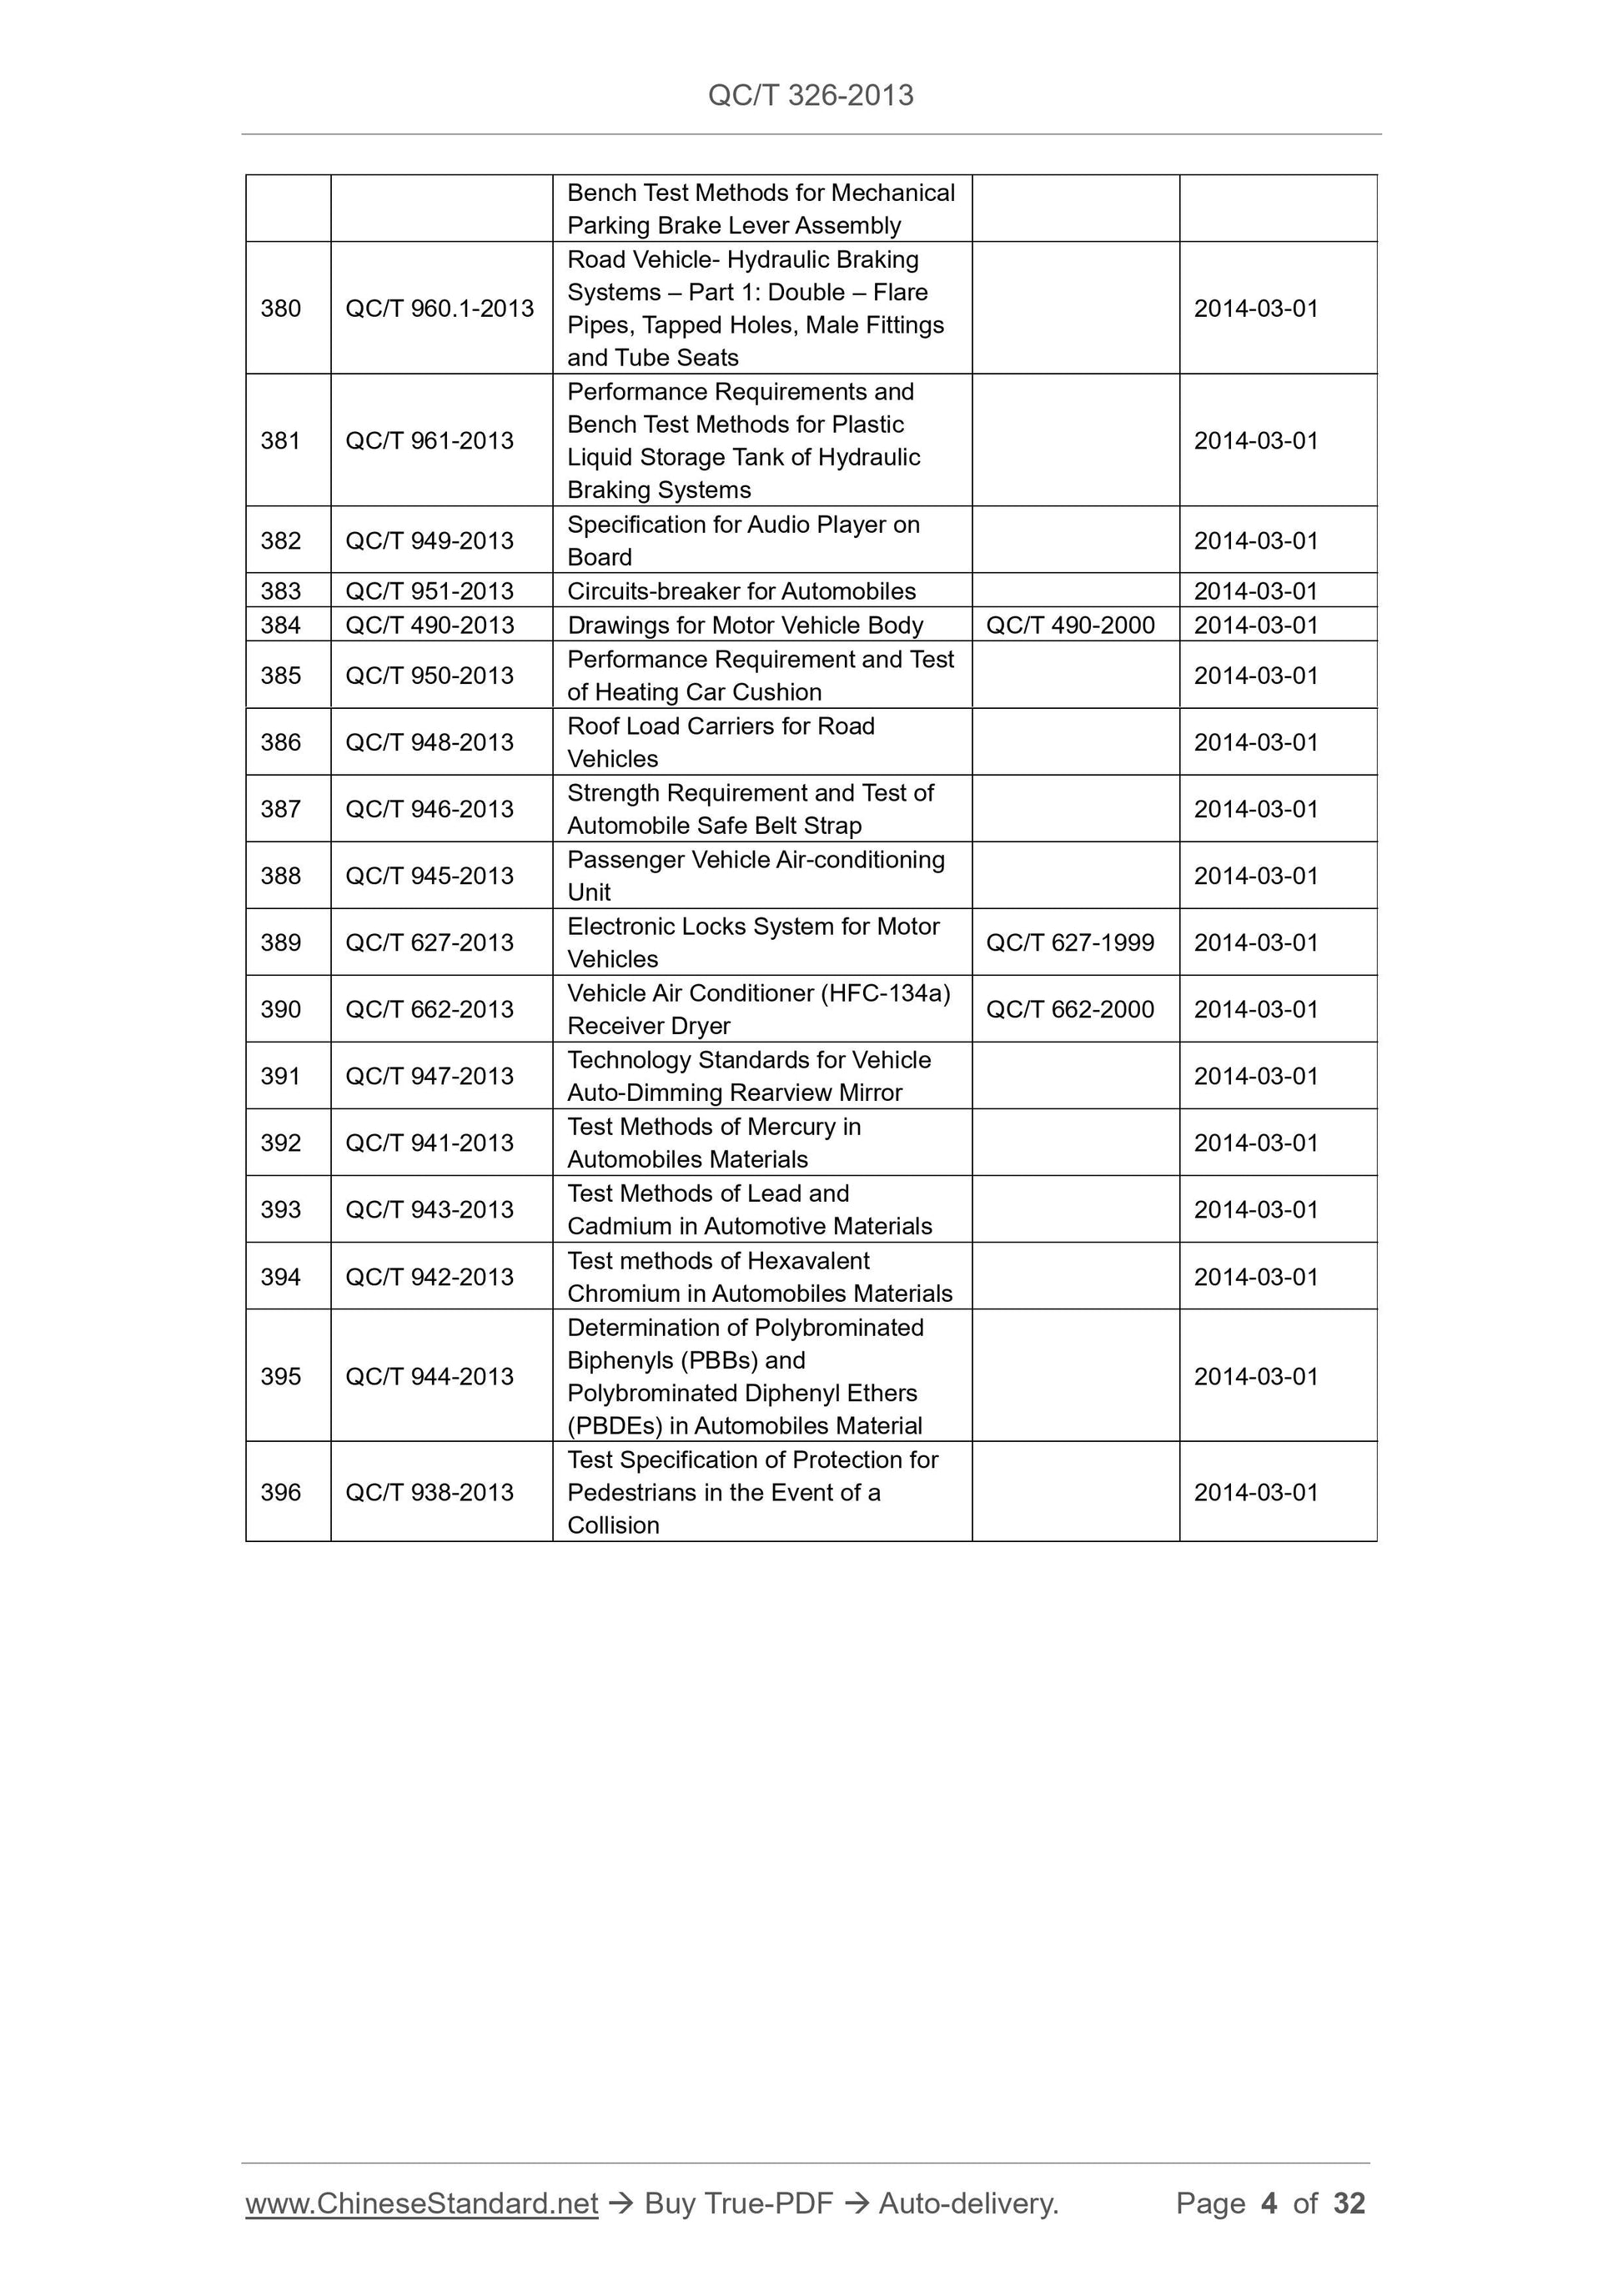 QC/T 326-2013 Page 4